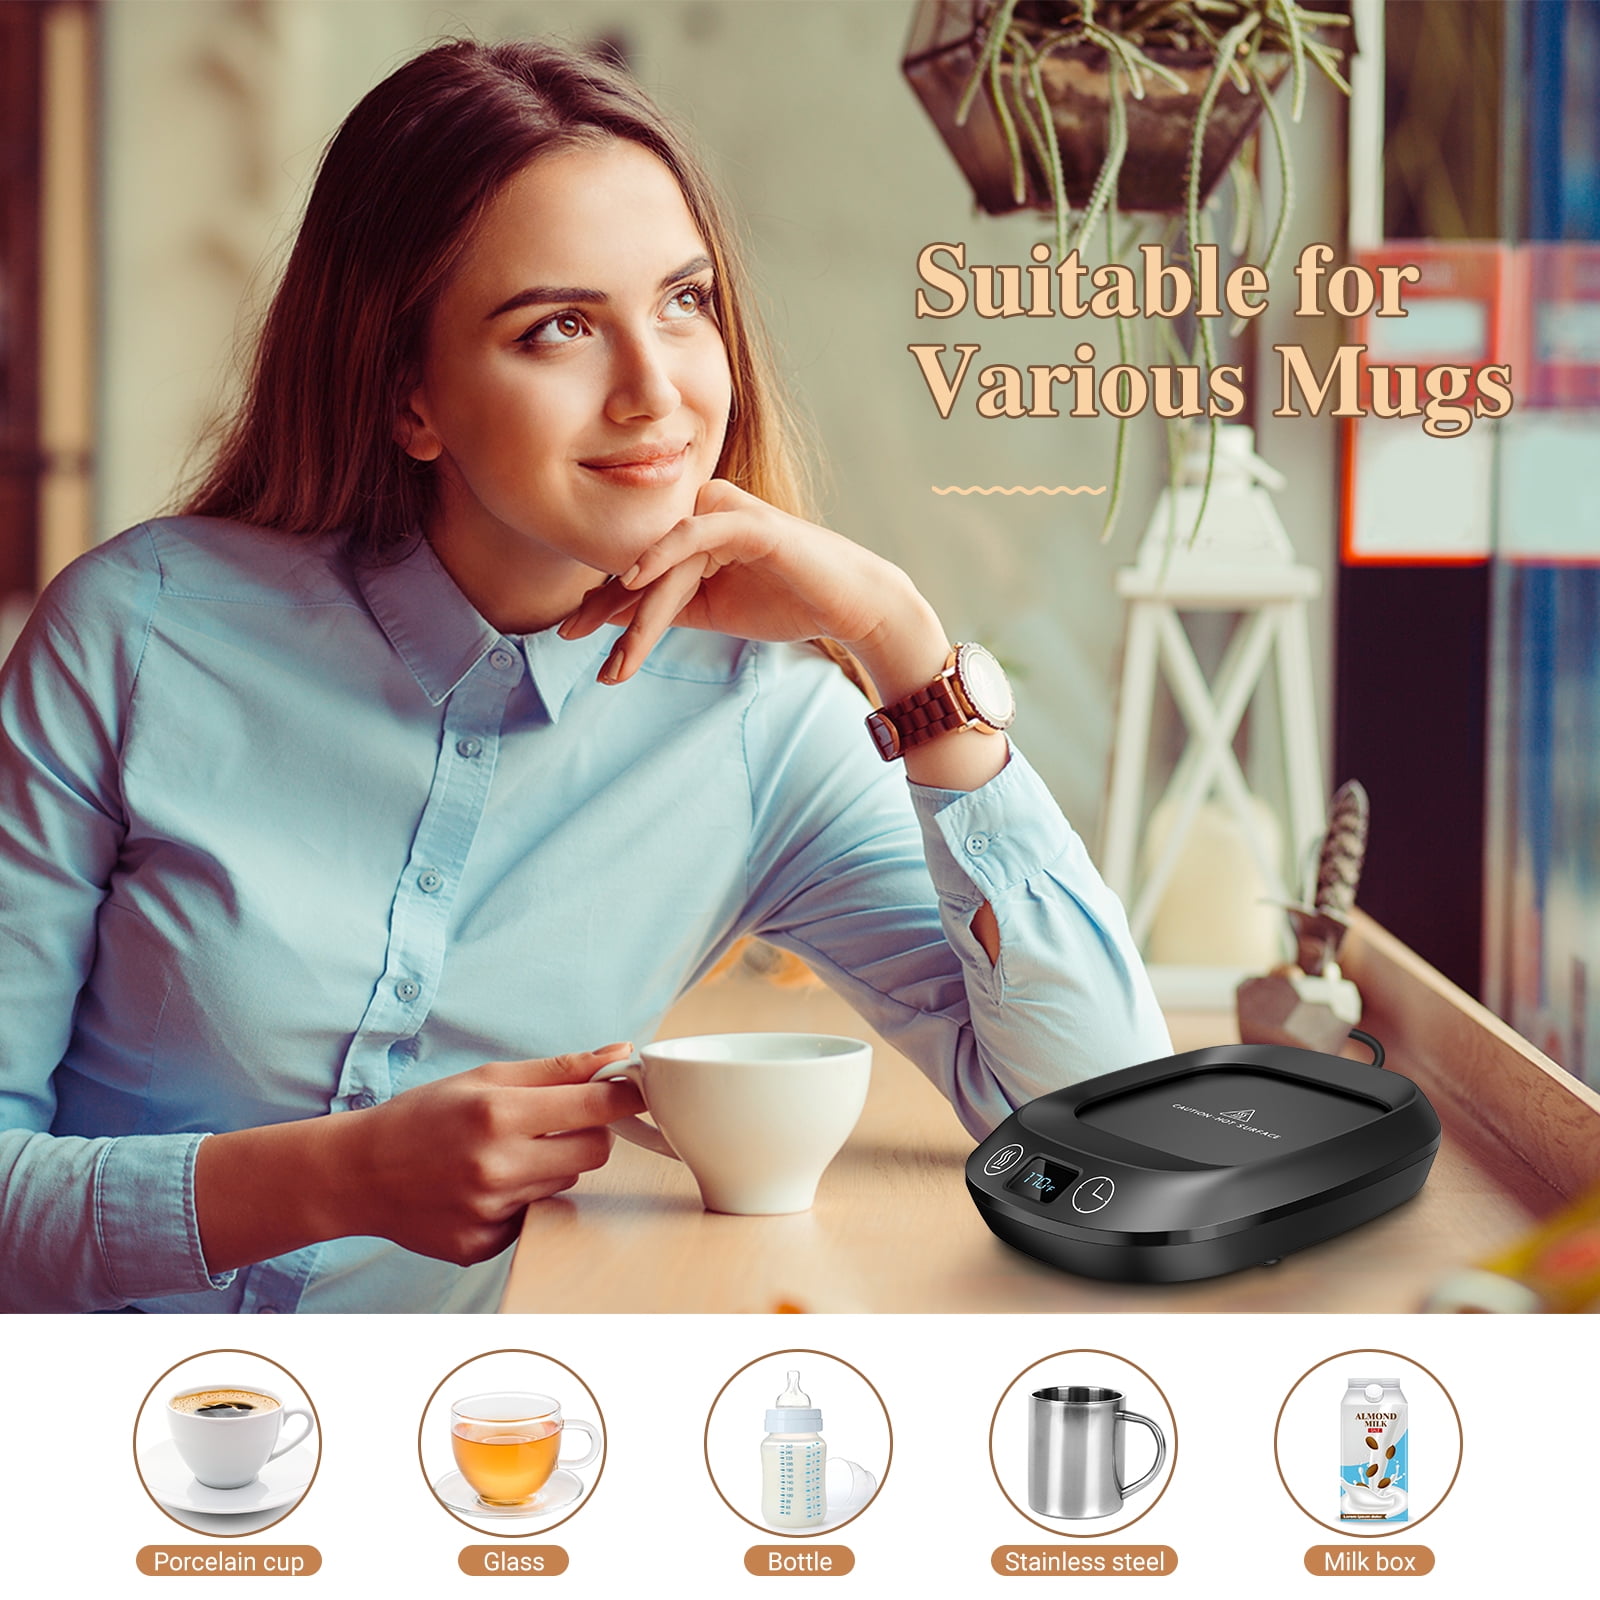 WHOLEV Coffee Mug Warmer, Smart Mug Warmer for Desk/Home, 3 Heat Settings  Temperature Controlled, 8H Auto Off with Phone Wireless Charging, Candle